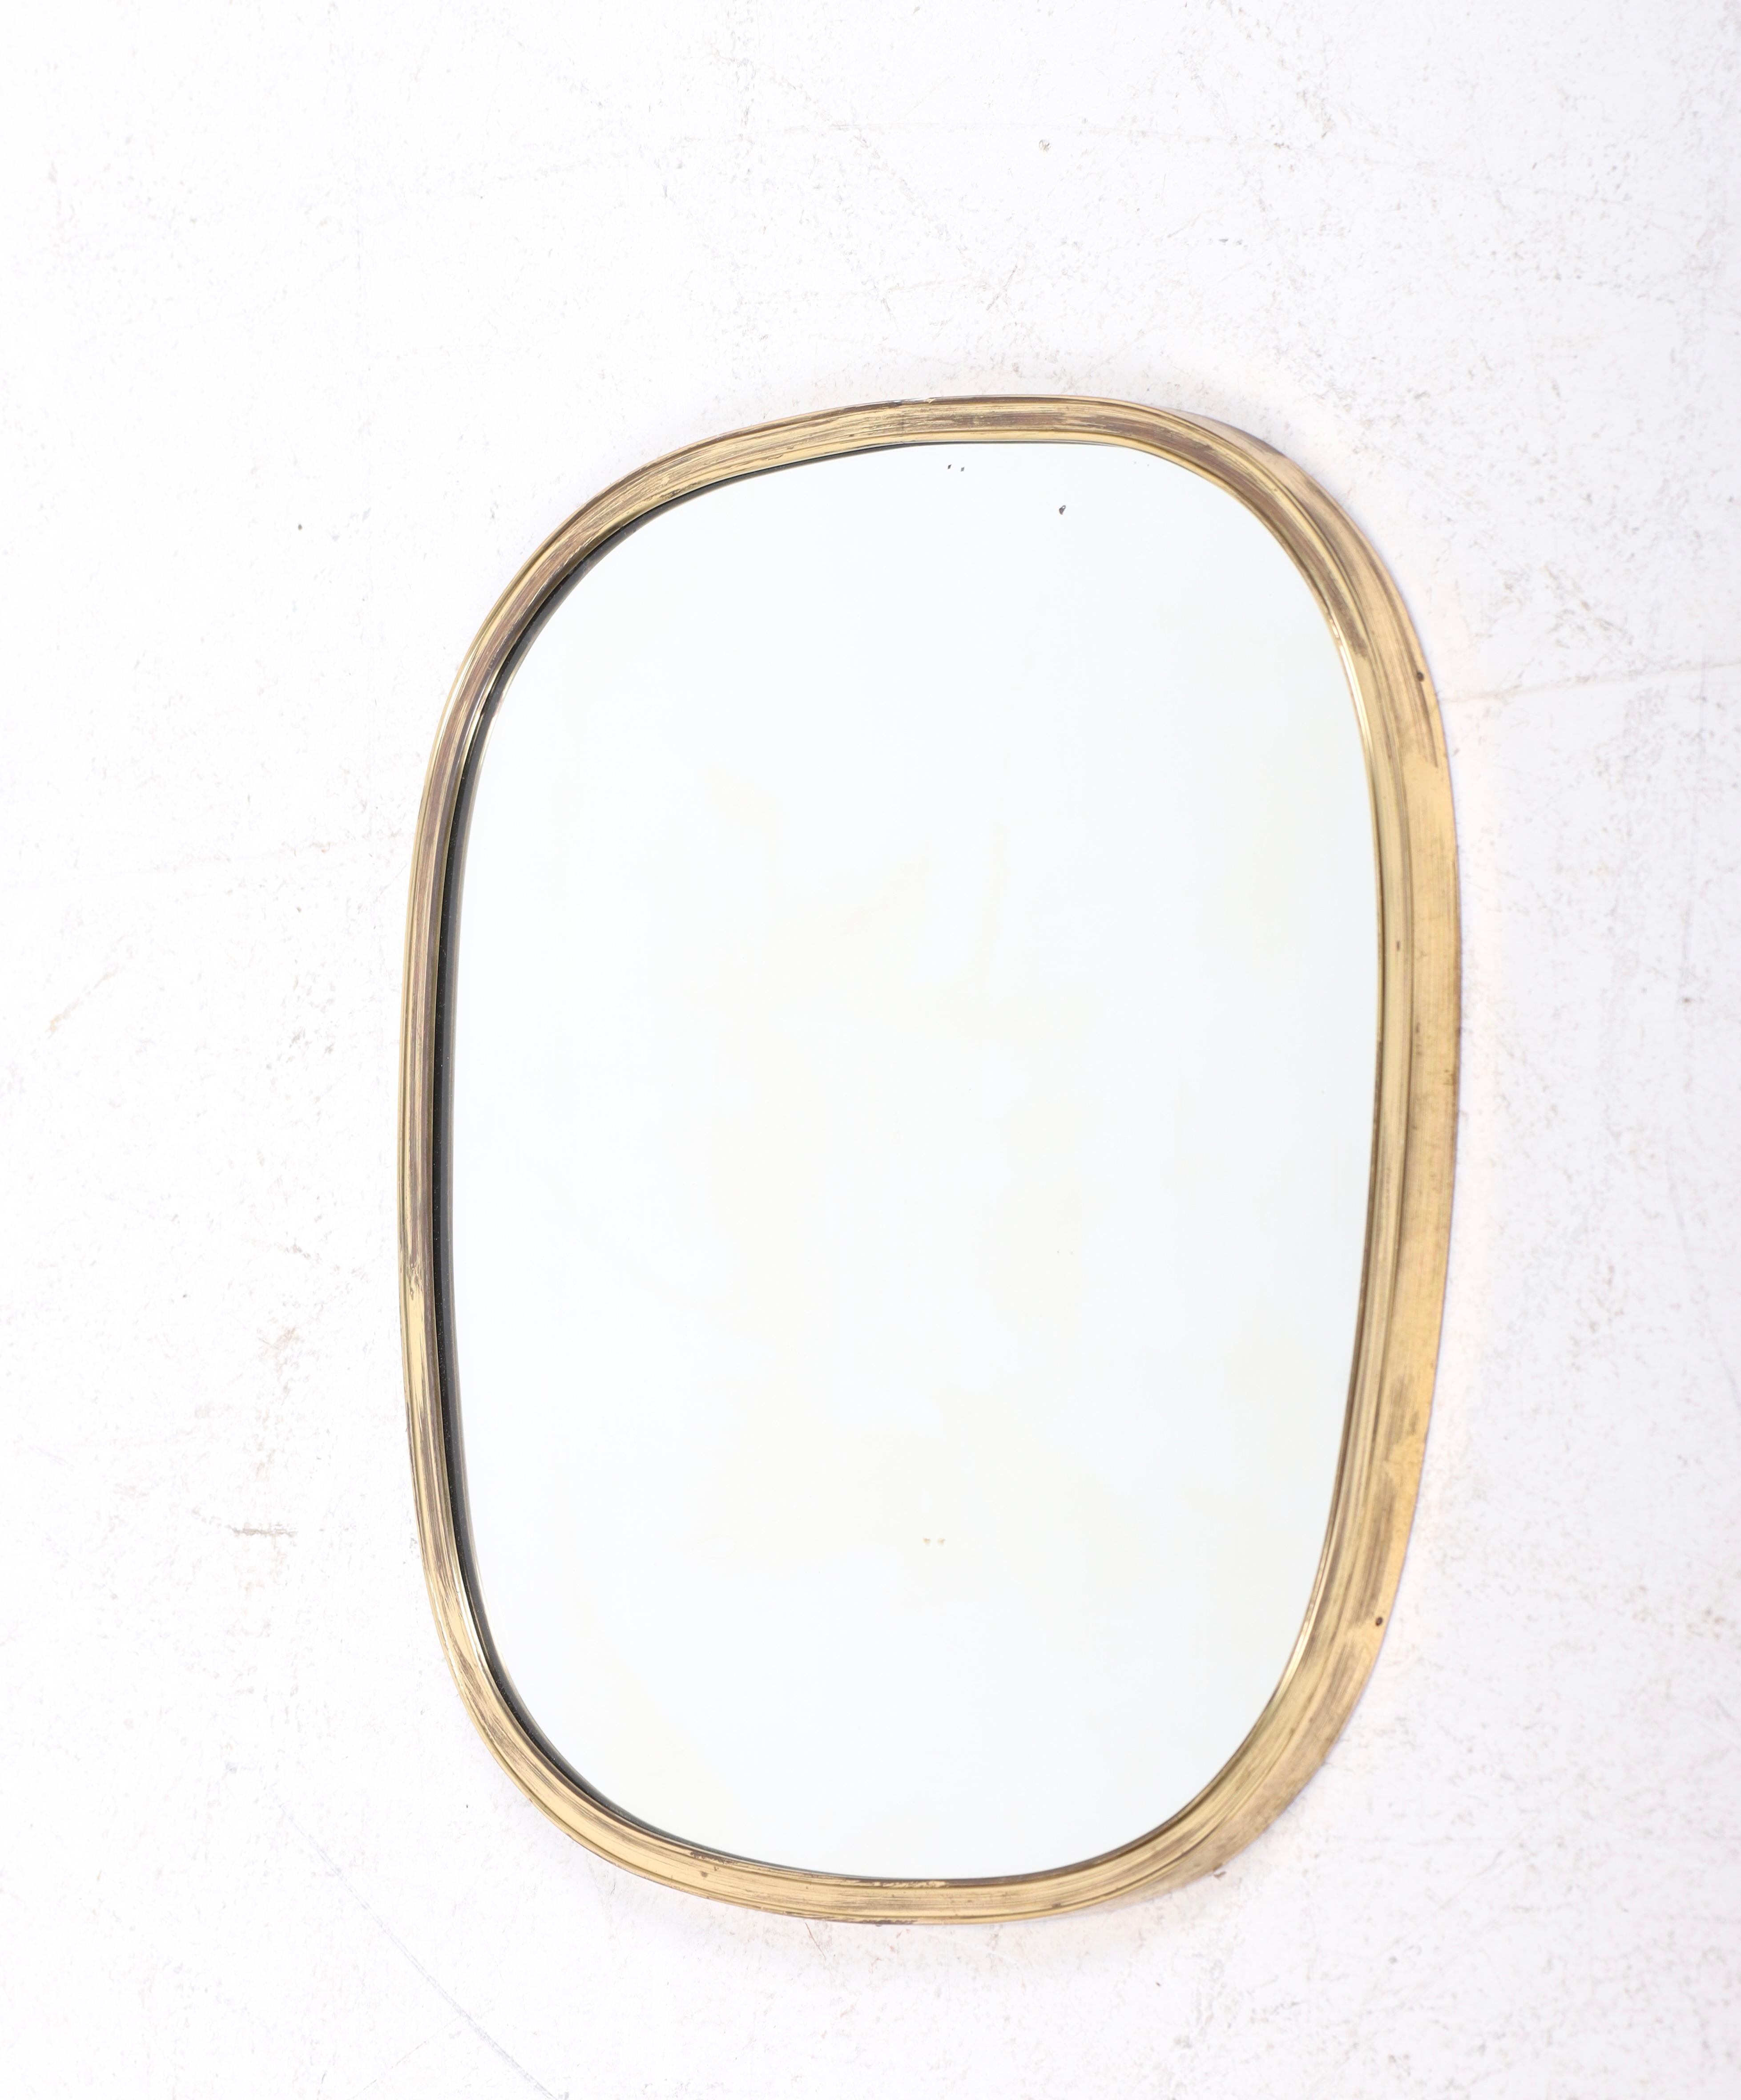 Mid-20th Century Wall Mirror in Brass, Made in Denmark 1950s For Sale